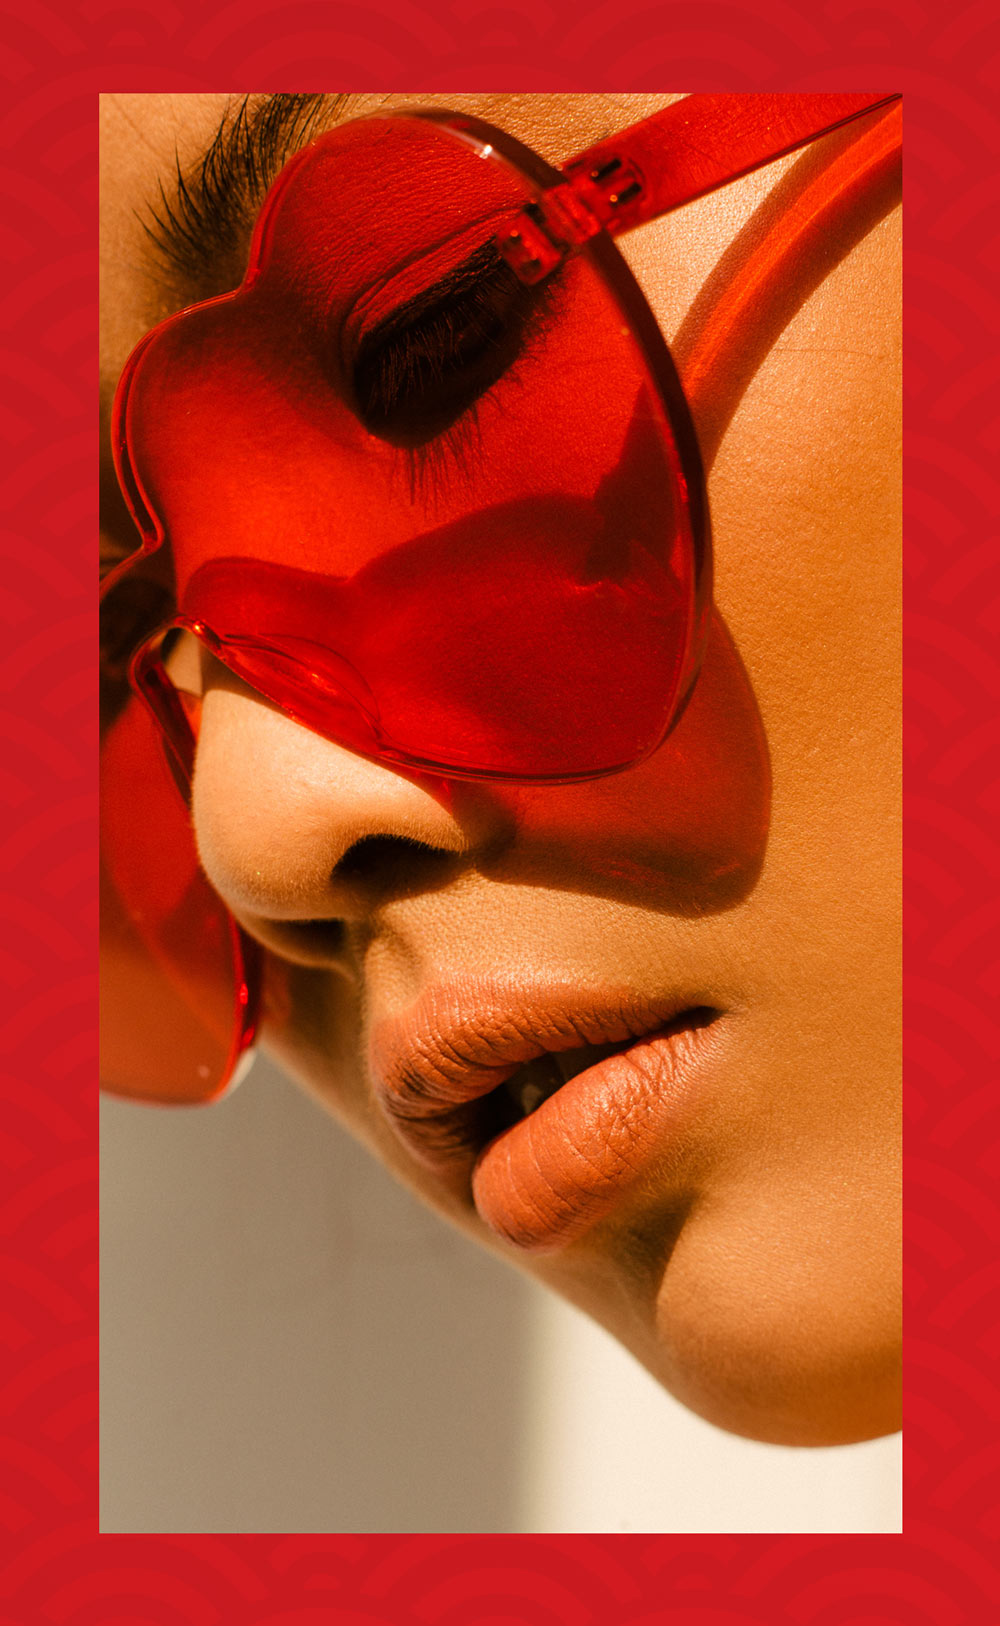 Photo of girl wearing red sunglasses, on red textured background